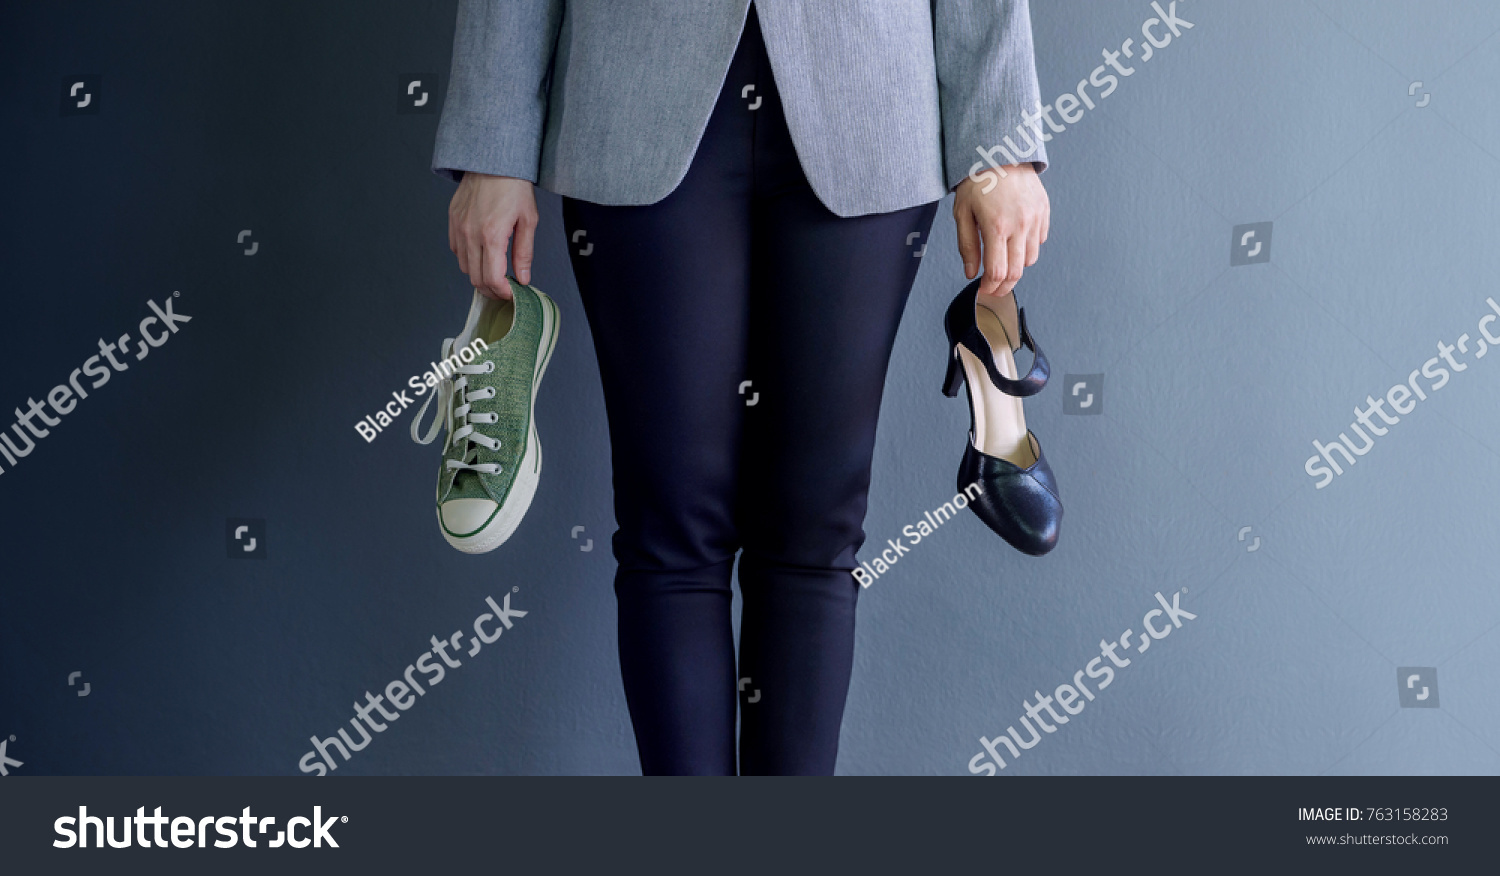 Work Life Balance Concept, present by Business Working Woman holding a High Heal and Sneaker Shoes, Croped image with Copy Space  #763158283